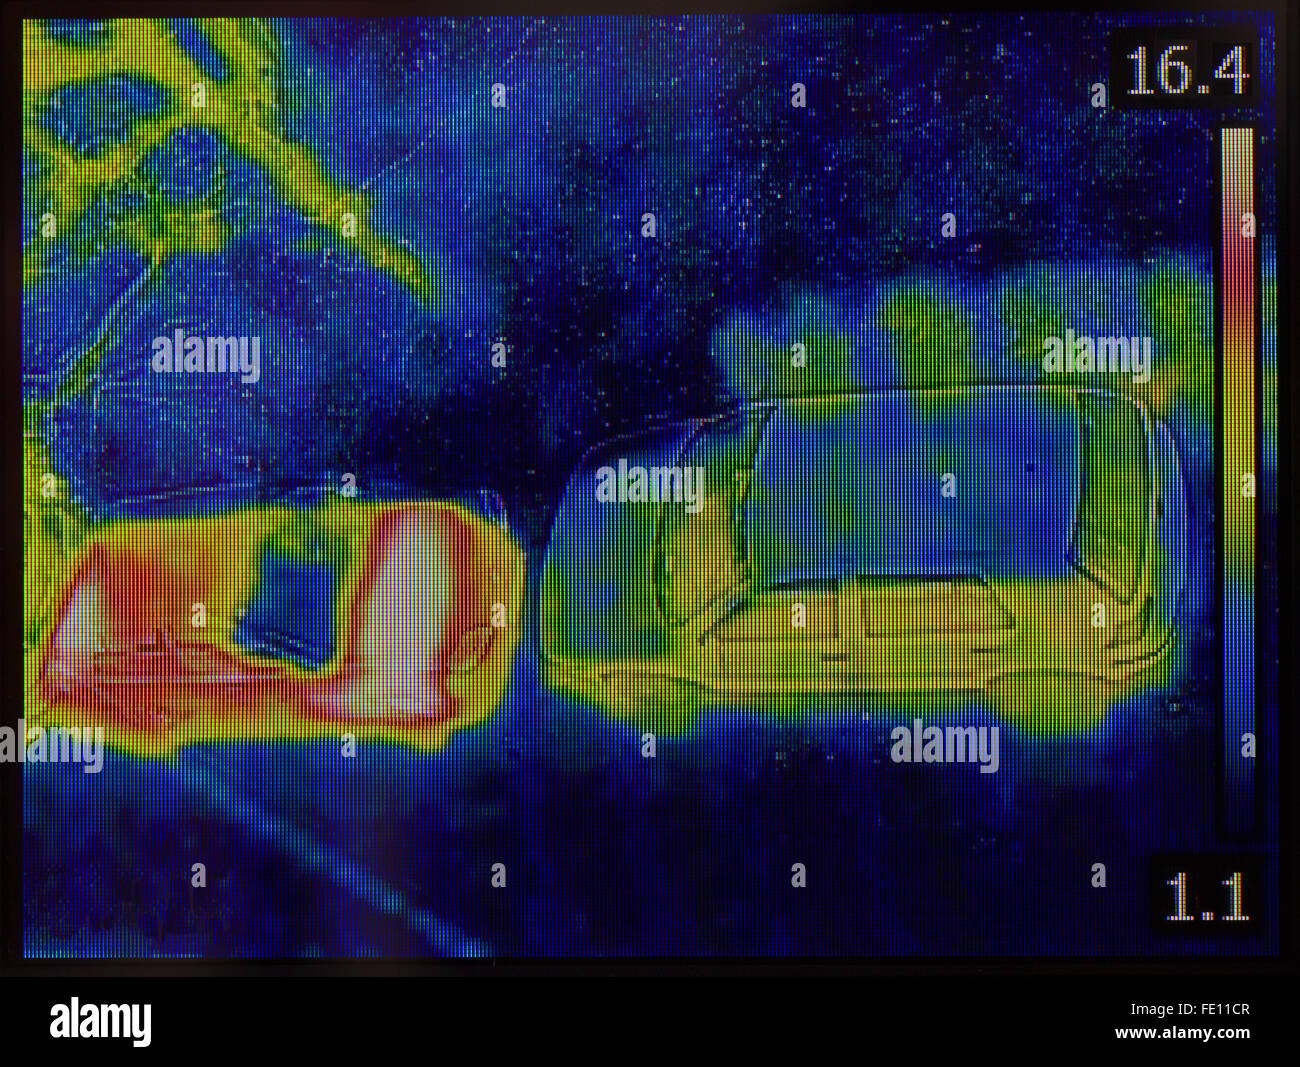 Thermal Imaging of Cars Night Vision Infrared Image Stock Photo